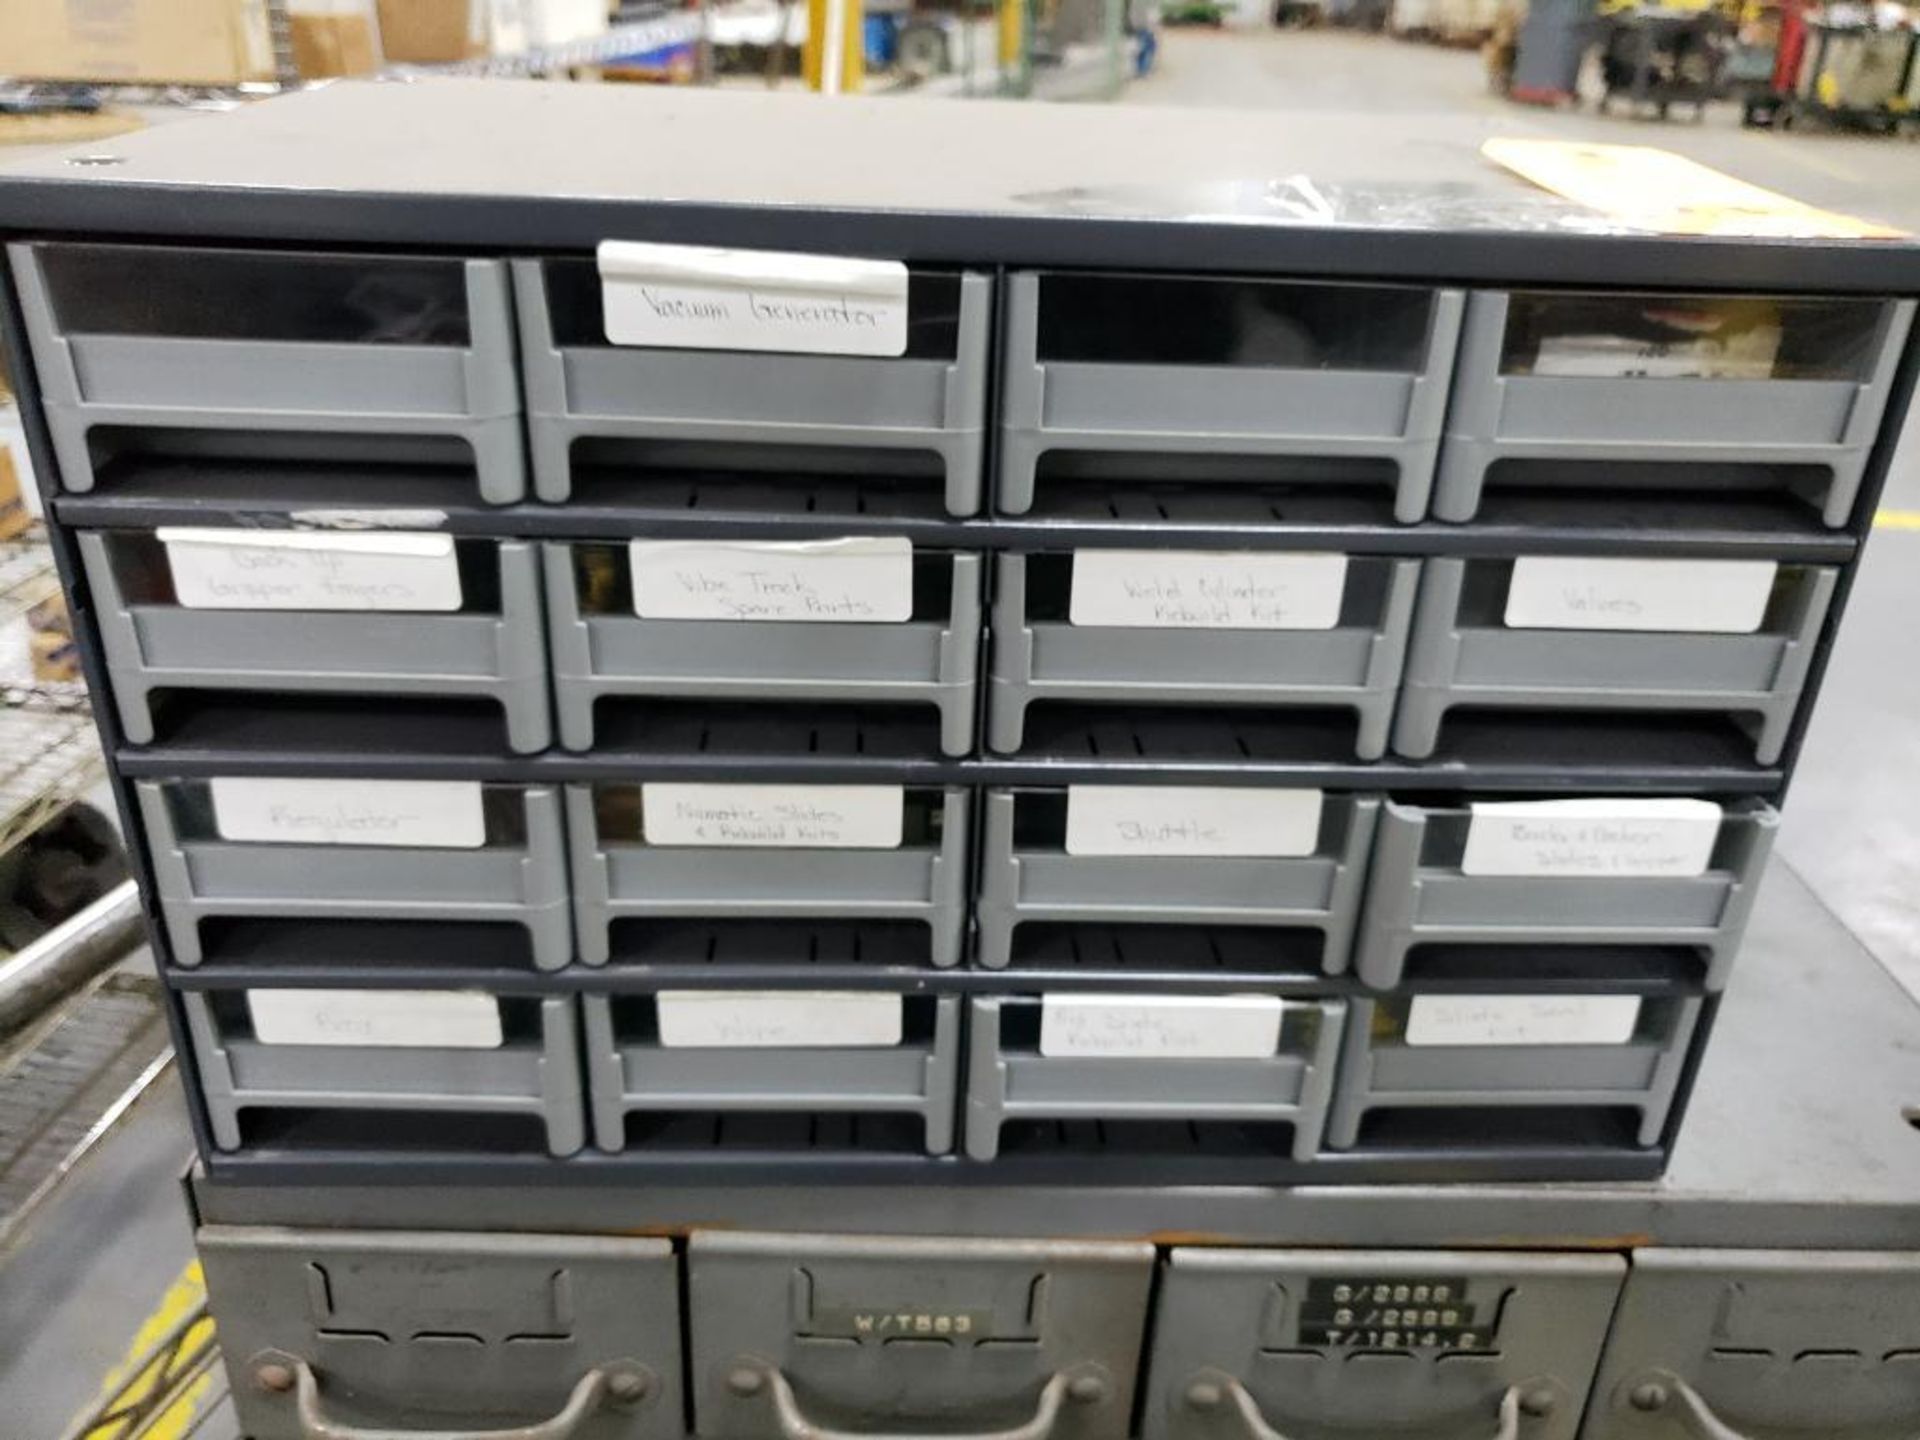 Qty 3 - Small parts storage drawers. - Image 19 of 20